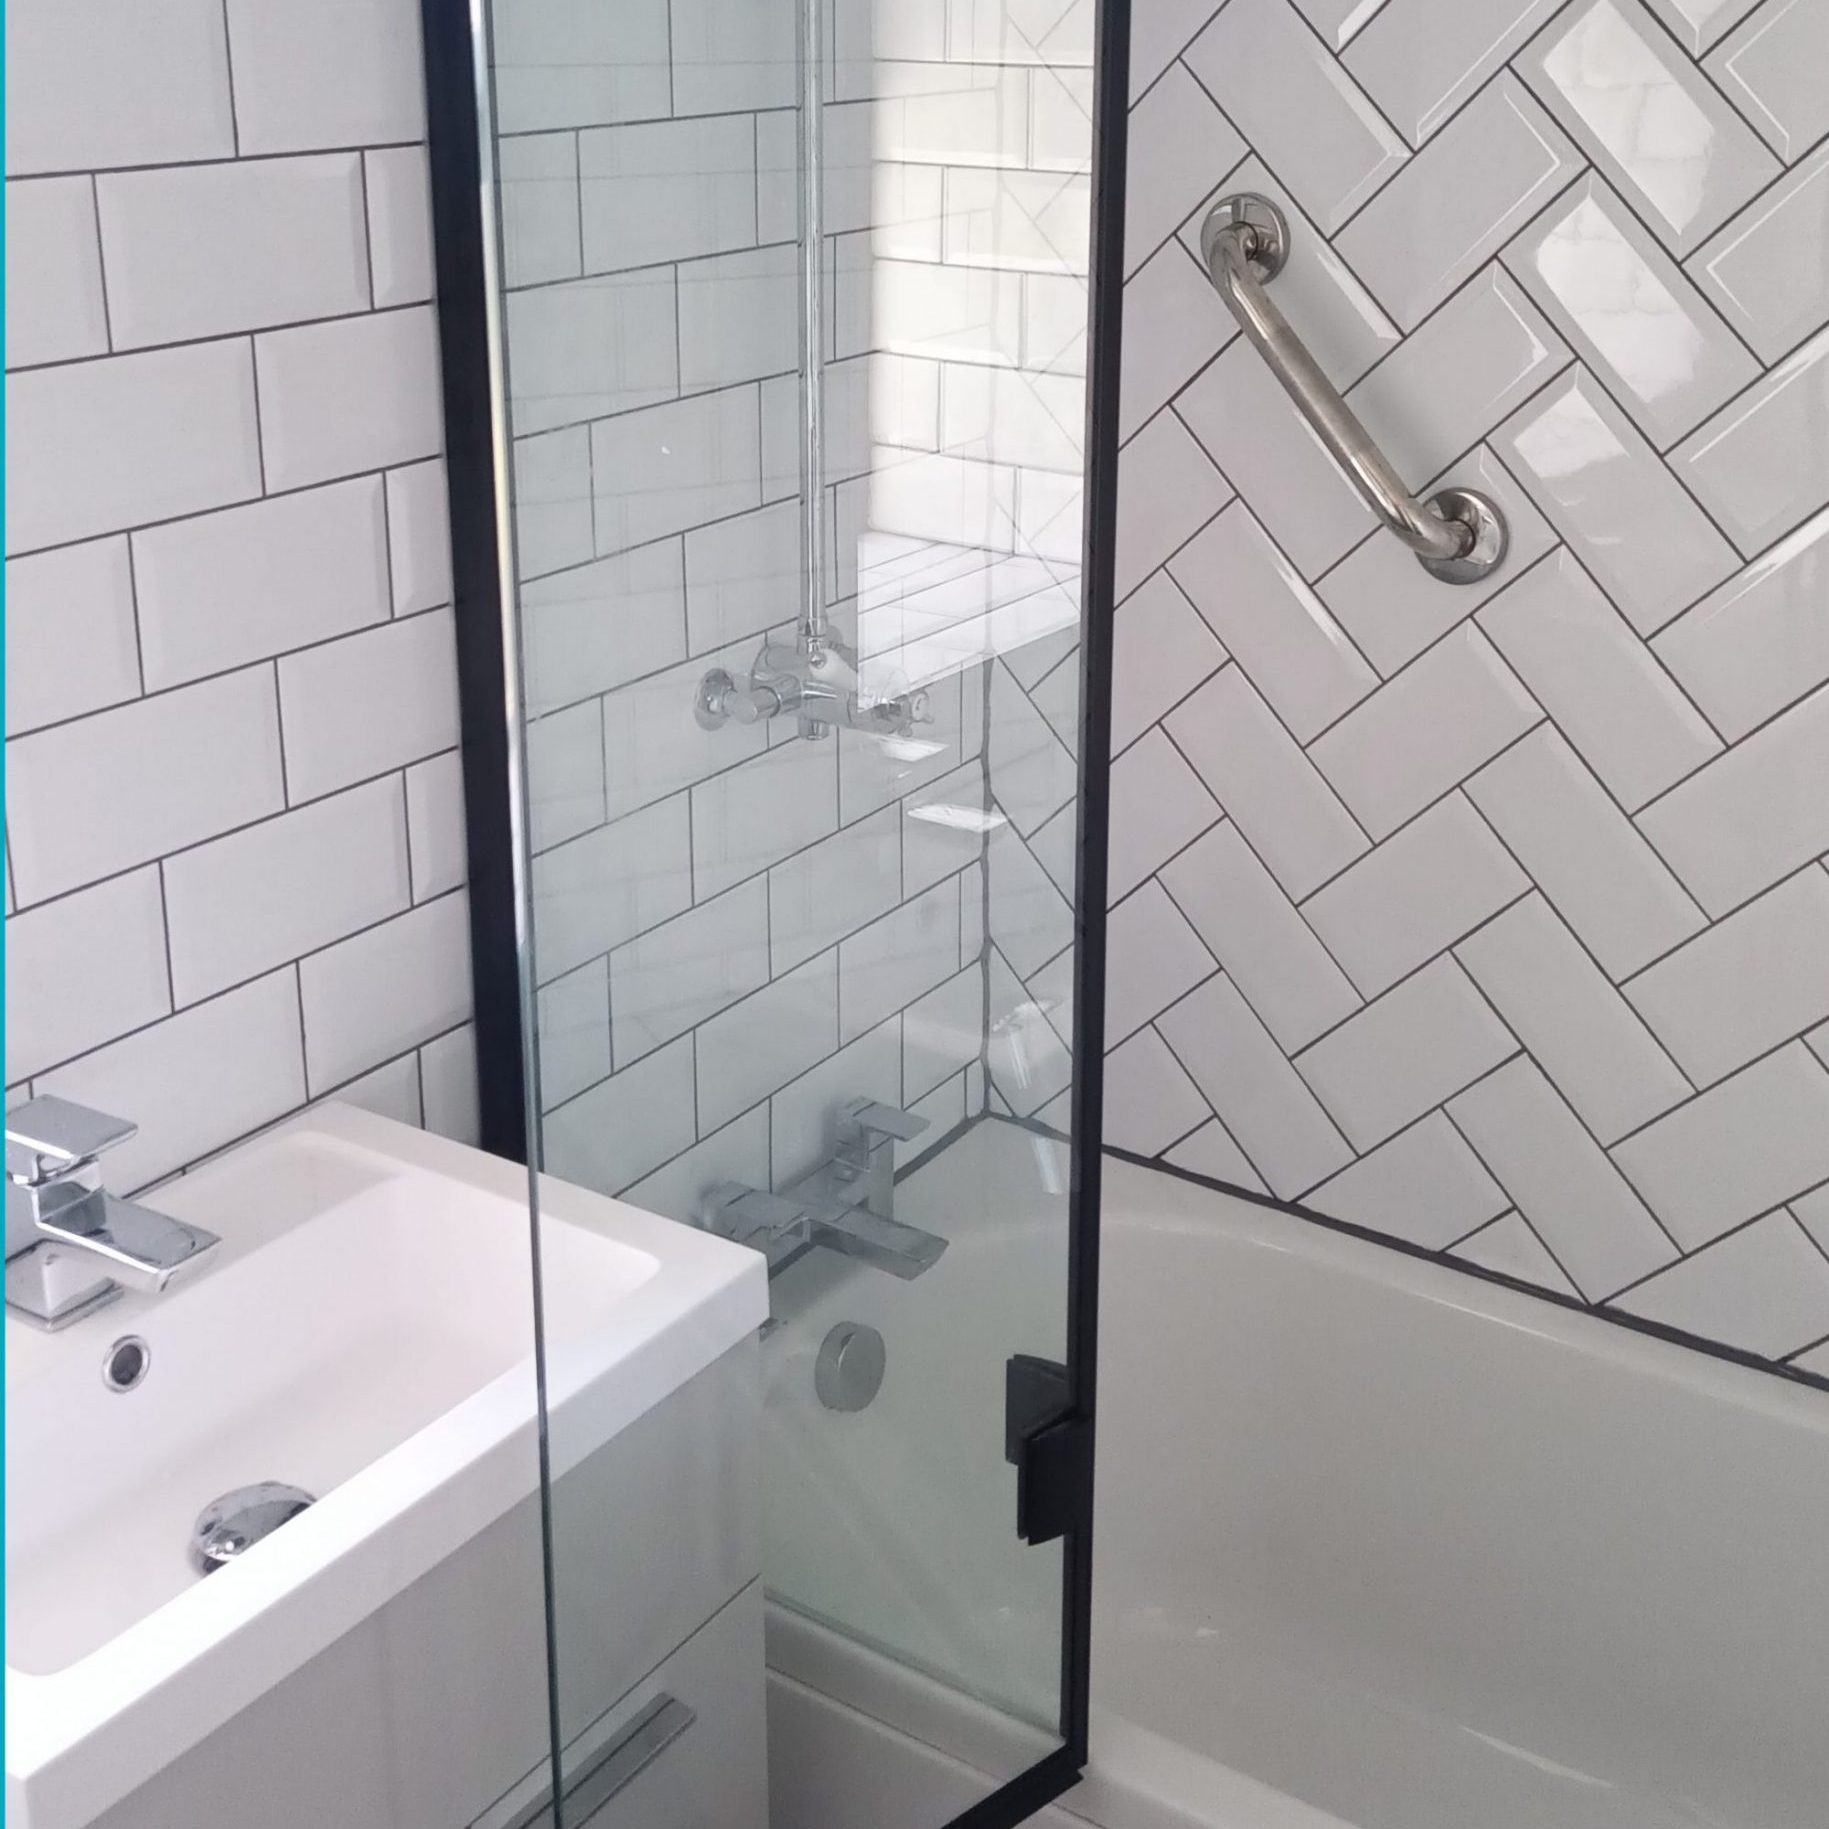 Bath and Shower Installation Services in Huddersfield